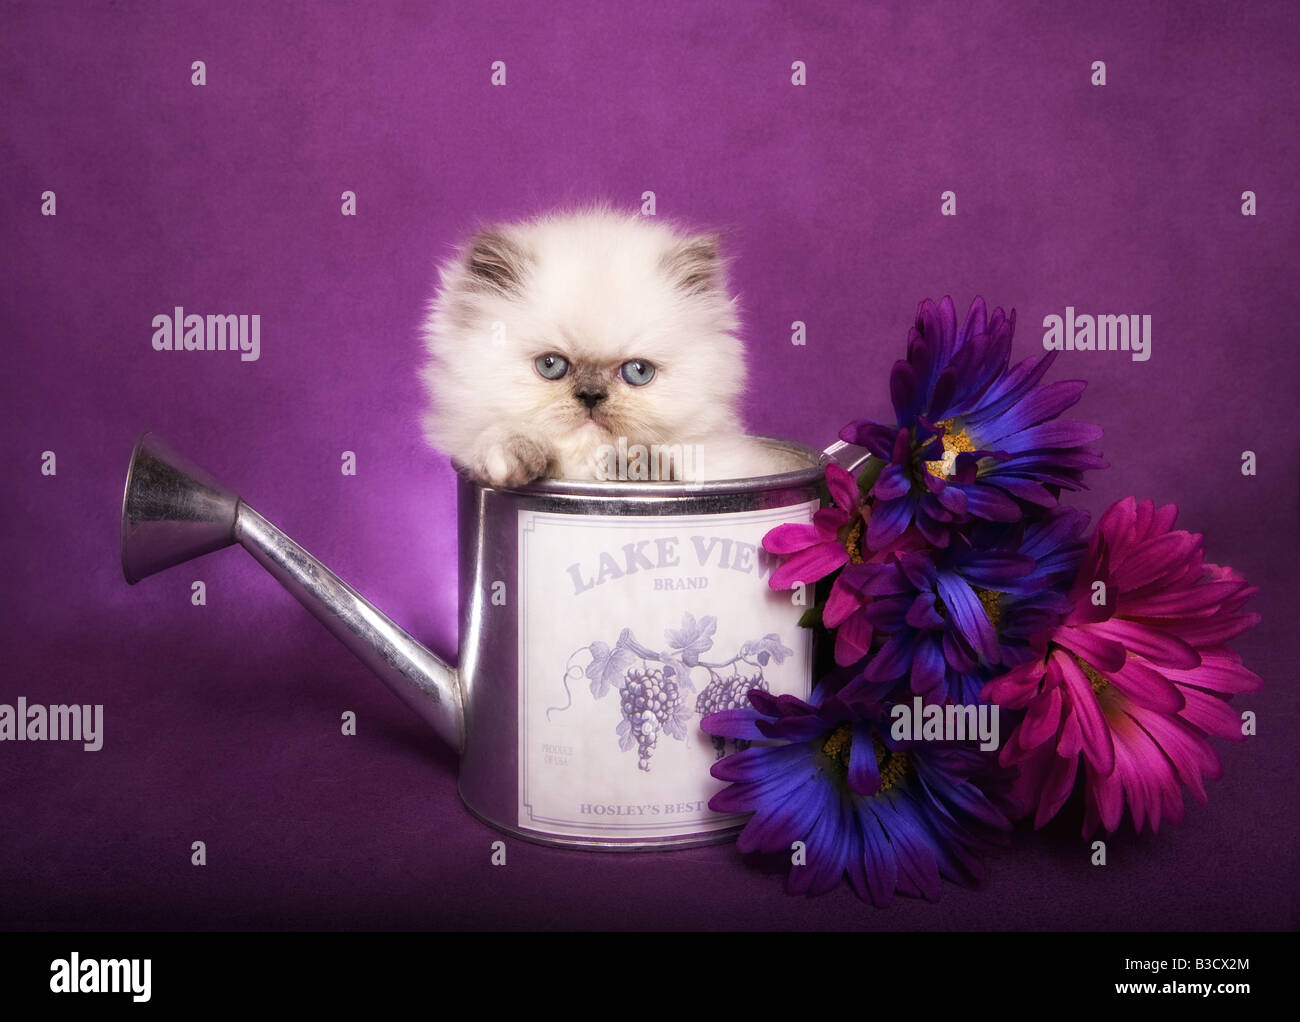 Cute torti point Himalayan kitten in watering can with flowers on purple background Stock Photo